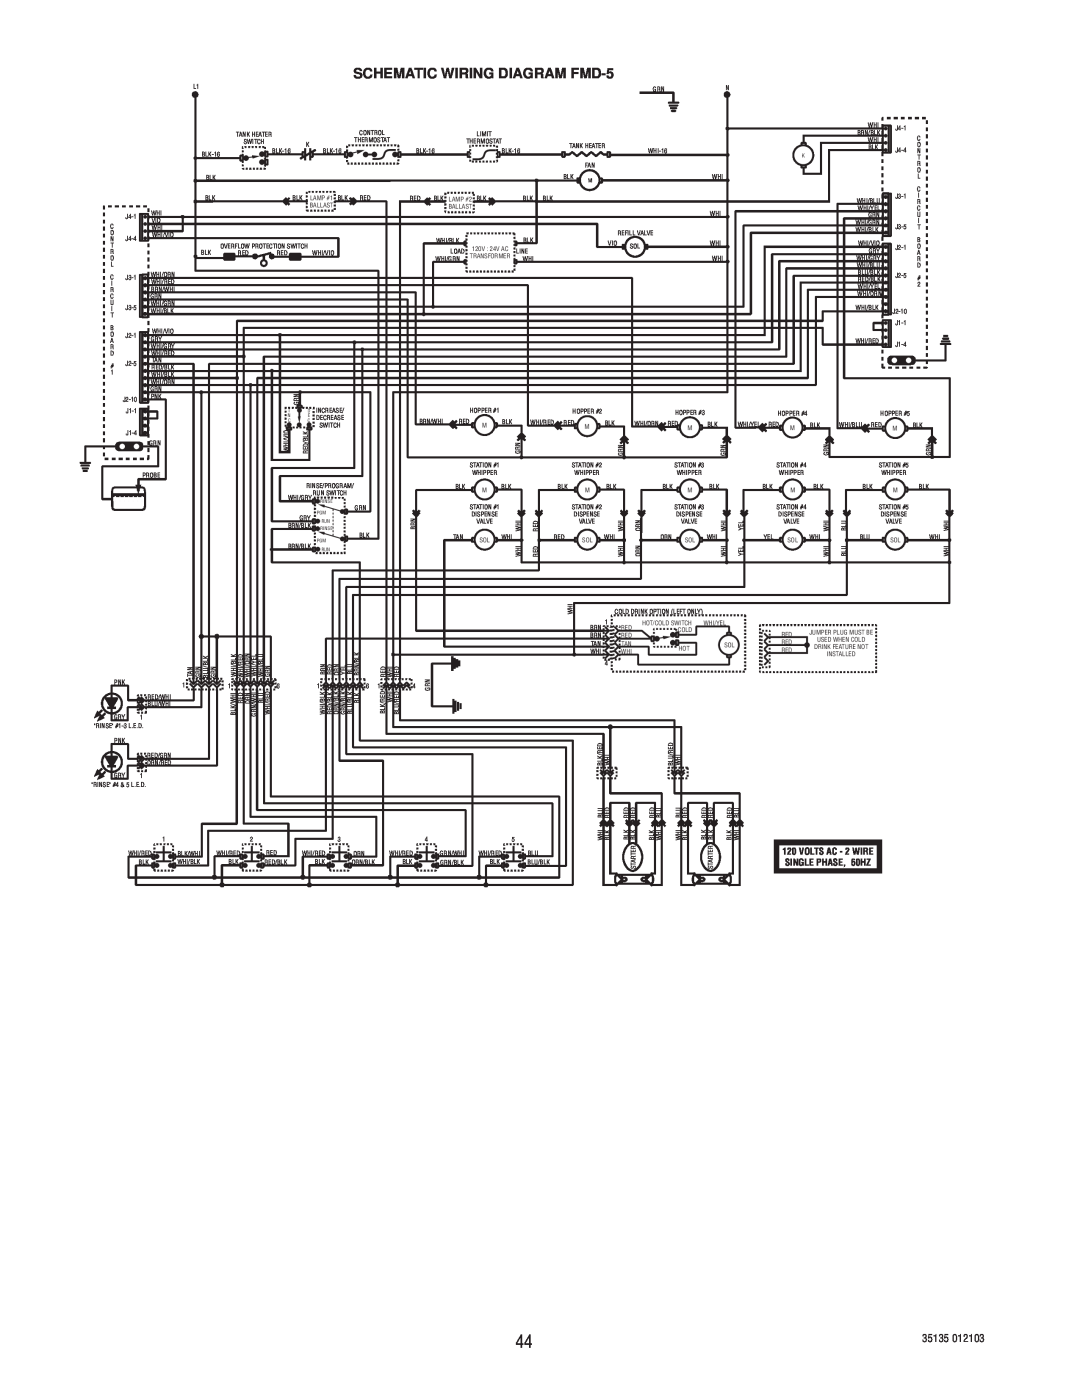 Bunn FMD-4 service manual SCHEMATIC WIRING DIAGRAM FMD-5, SINGLE PHASE, 60HZ, VOLTS AC - 2 WIRE 